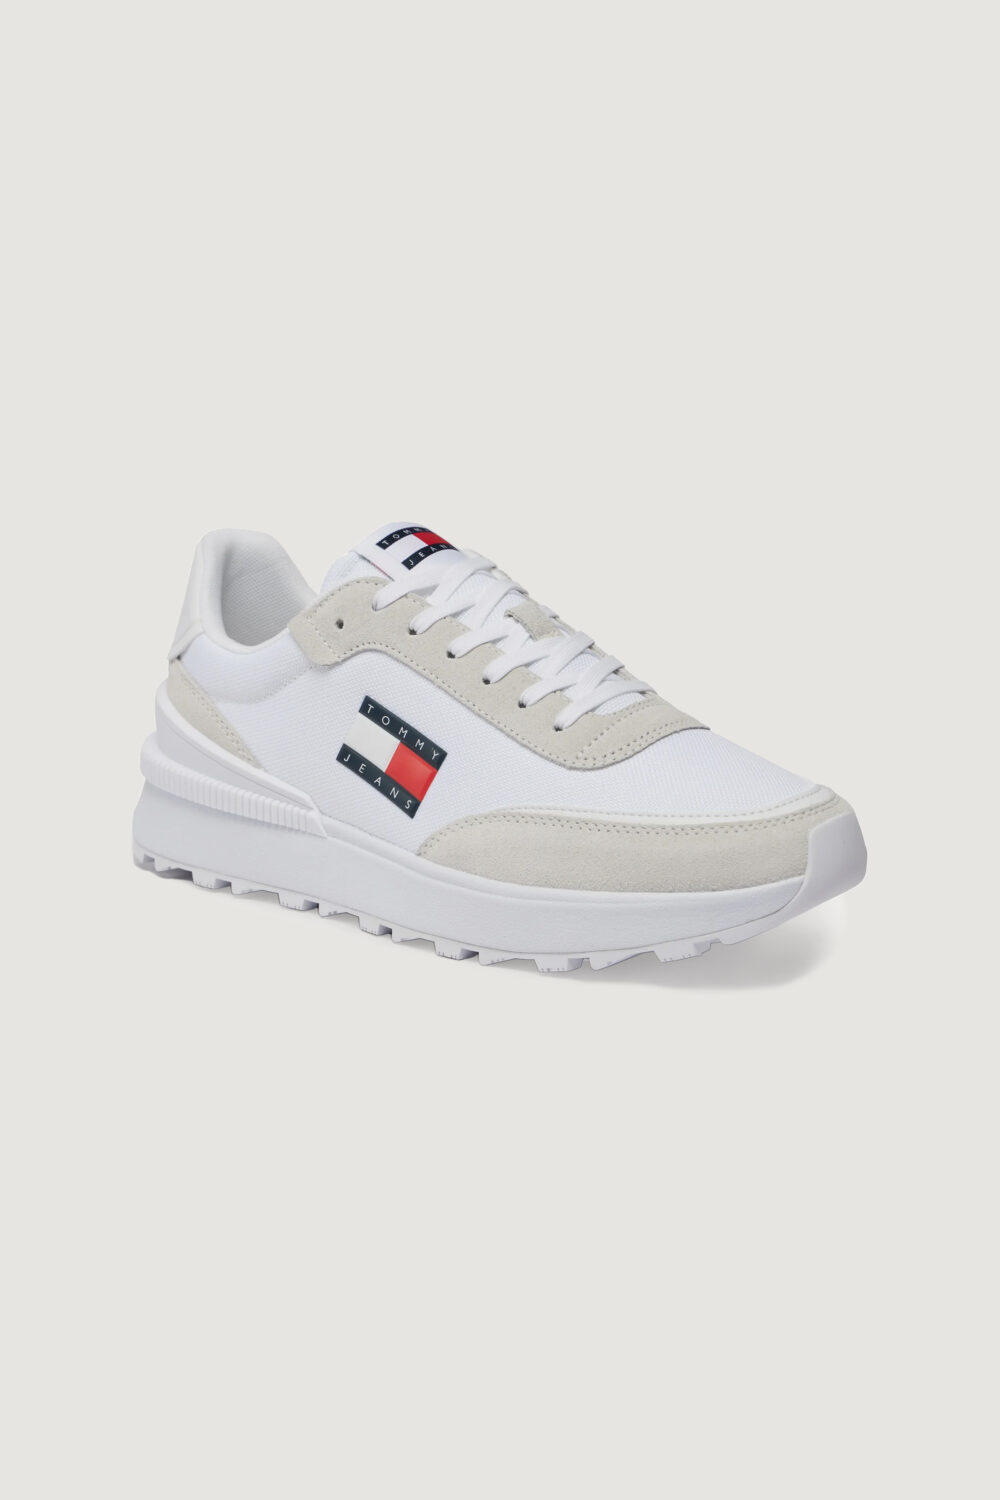 Sneakers Tommy Hilfiger Jeans TECHNICAL RUNNER Bianco - Foto 5